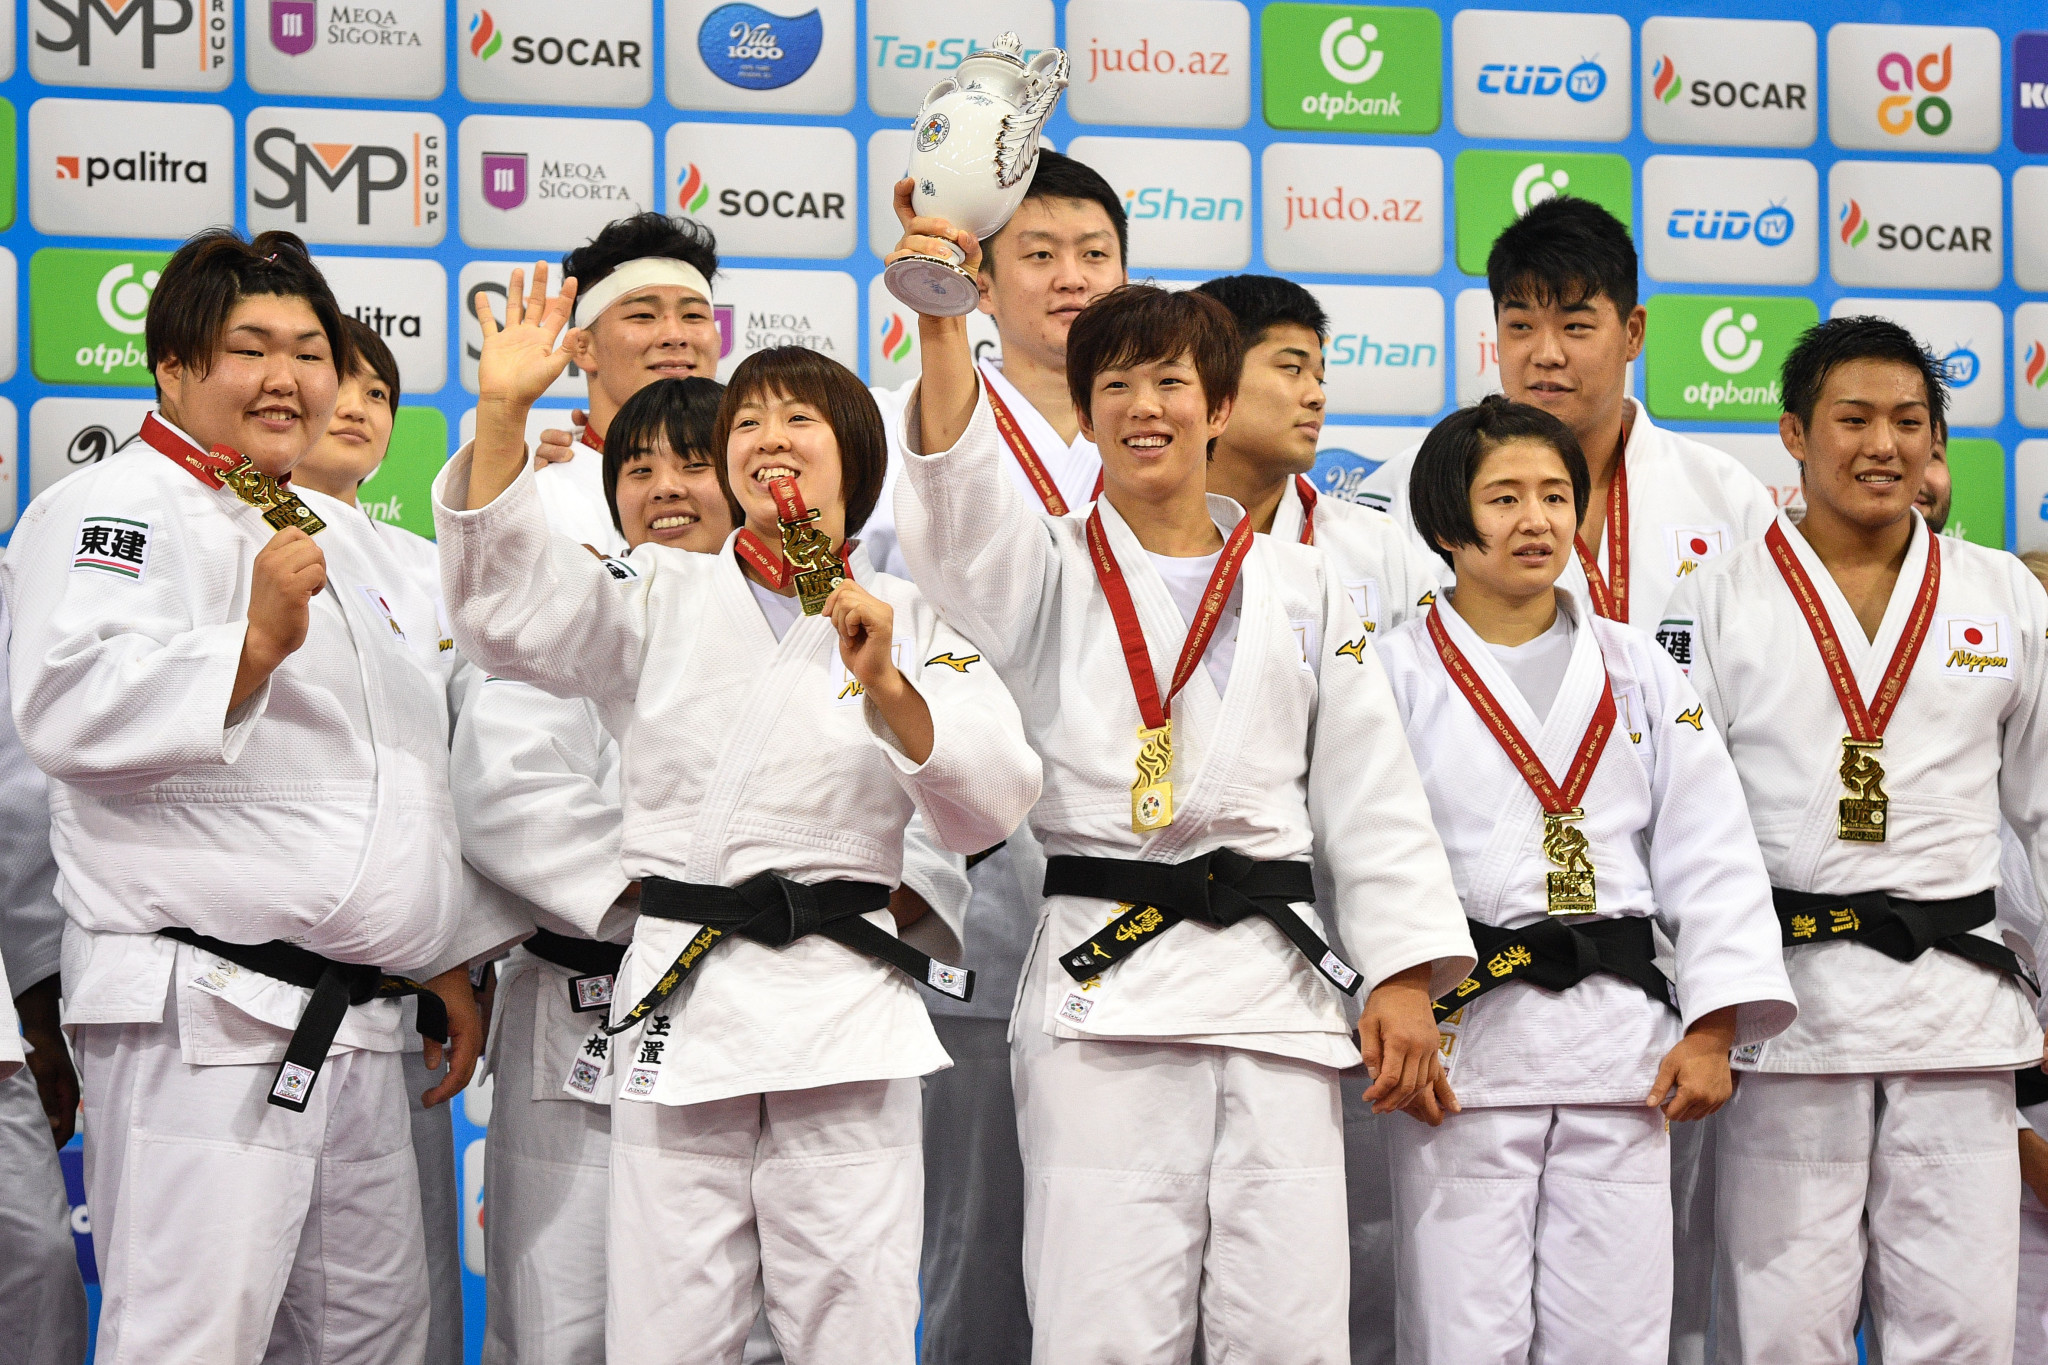 Japan have proved dominant in the format, winning gold medals in 2017 and 2018 ©Getty Images